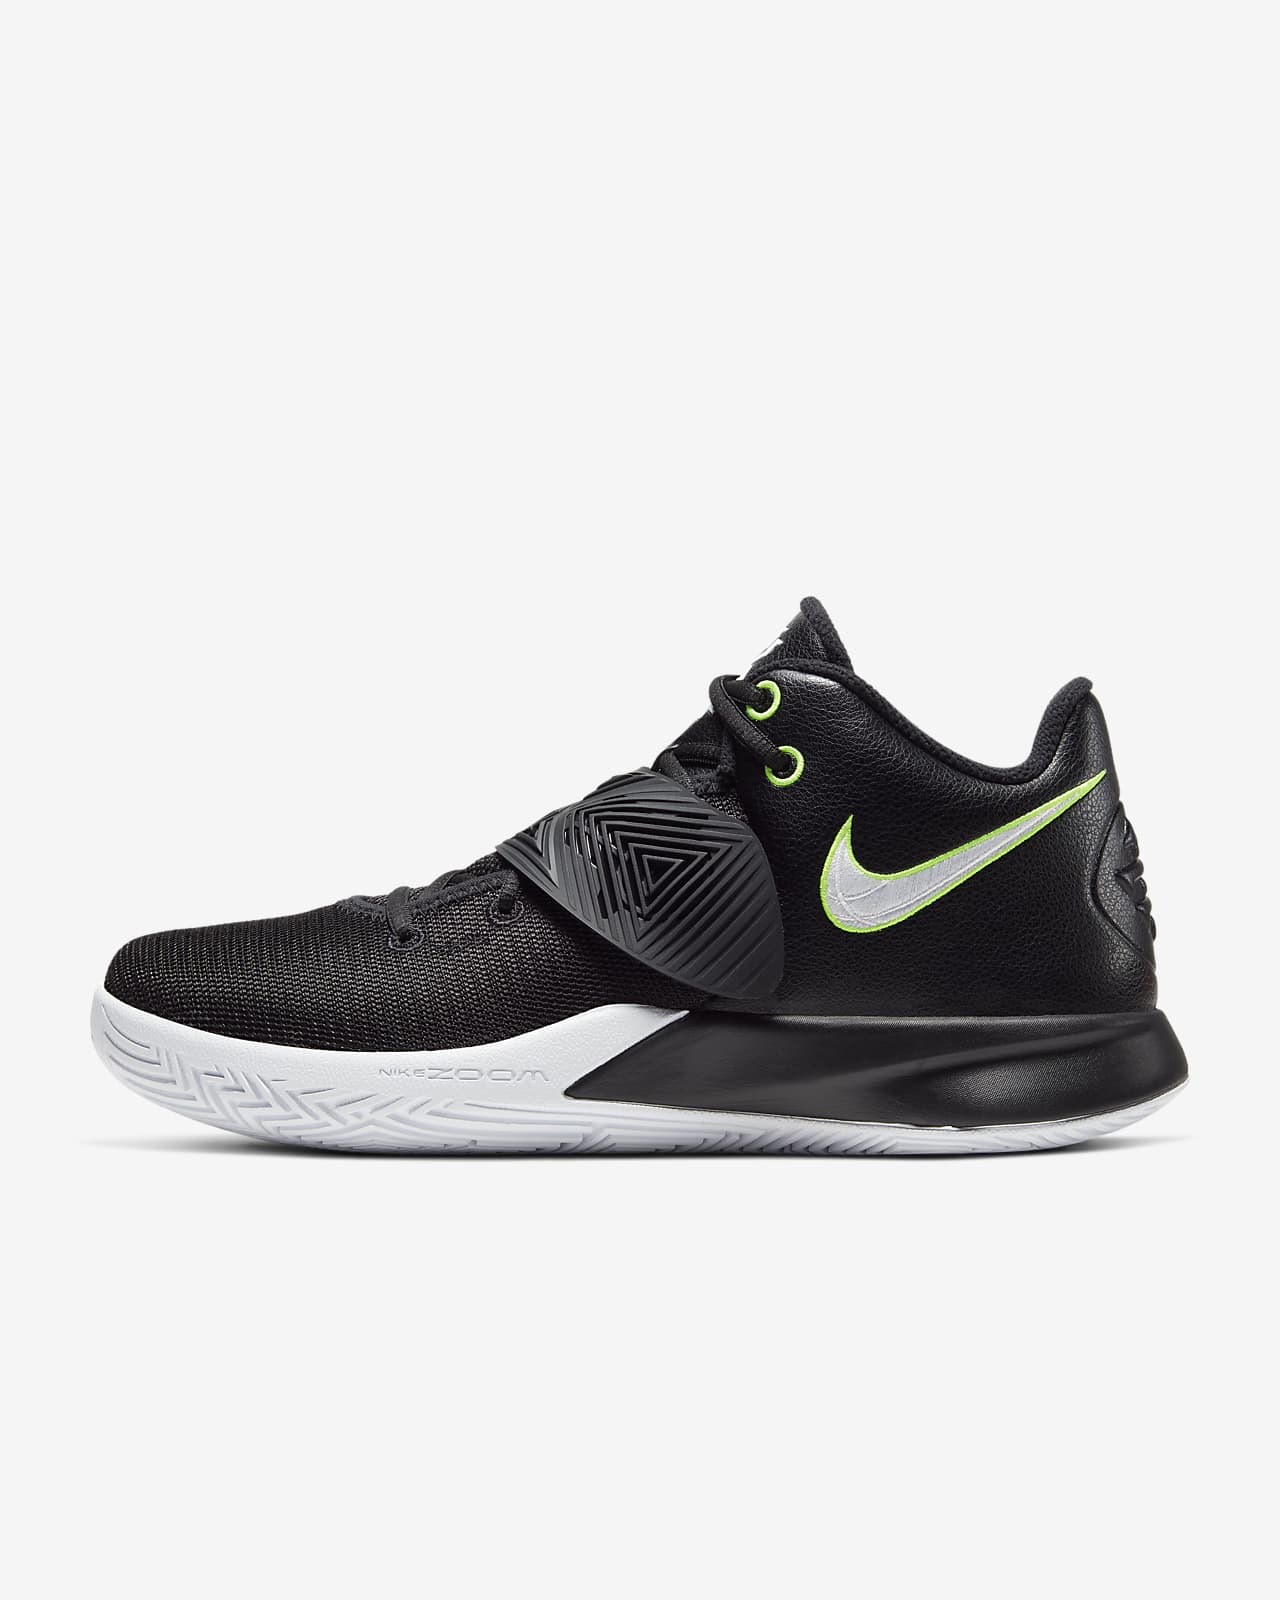 nike basketball shoes without laces